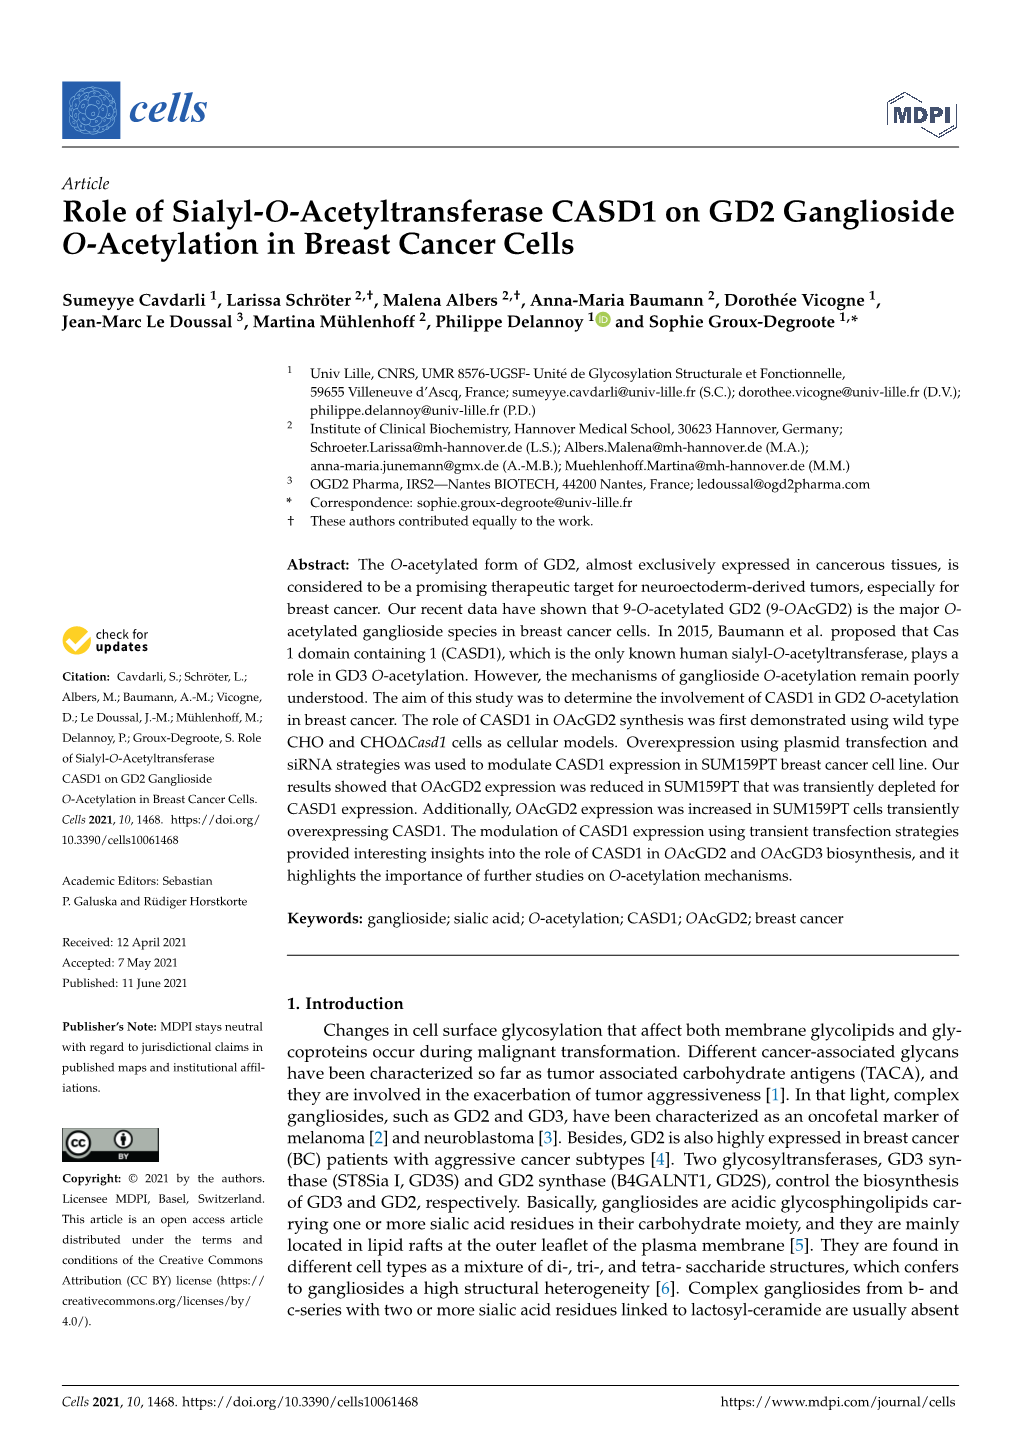 Role of Sialyl-O-Acetyltransferase CASD1 on GD2 Ganglioside O-Acetylation in Breast Cancer Cells